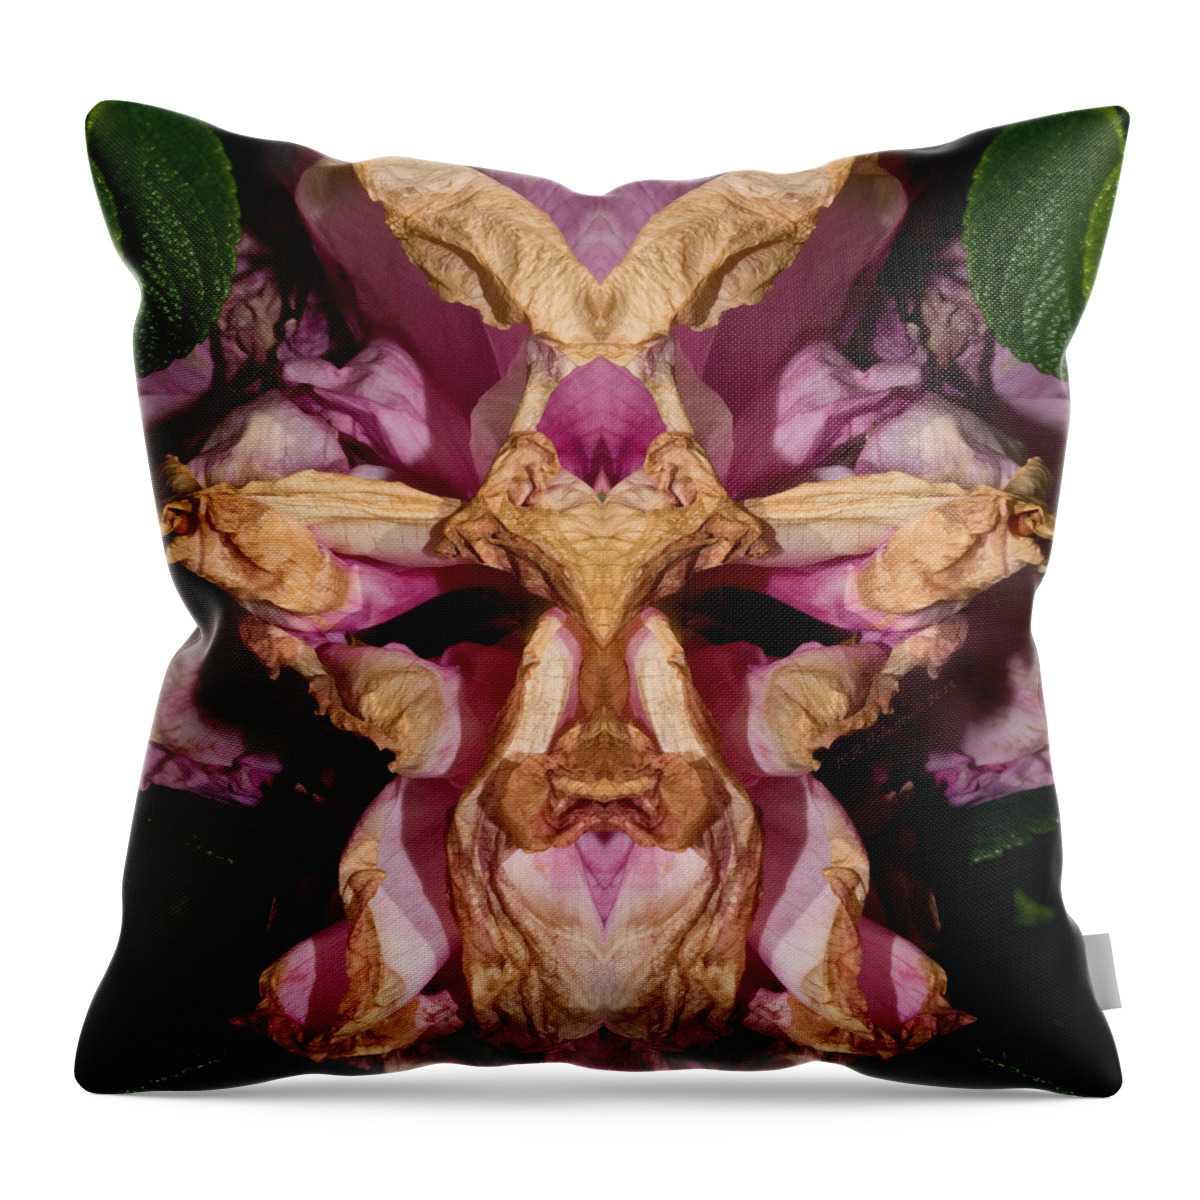 Wild Rose Throw Pillow featuring the photograph The Queen's Servant by WB Johnston